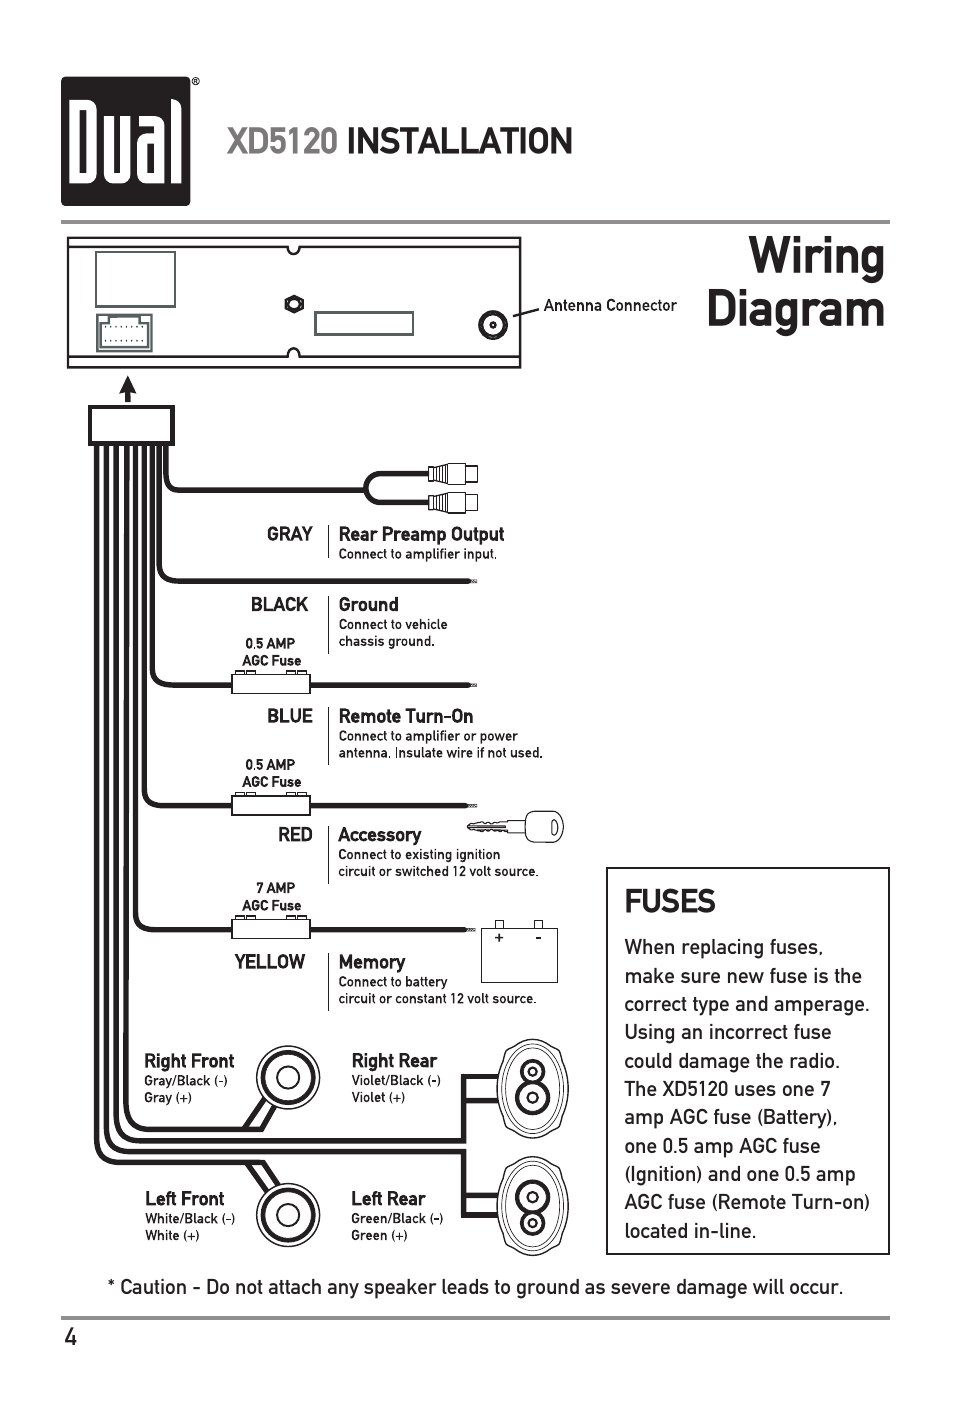 Wiring diagram | Dual XD5120 User Manual | Page 4 / 12  Wiring Diagram For Radio 760835    Manuals Directory